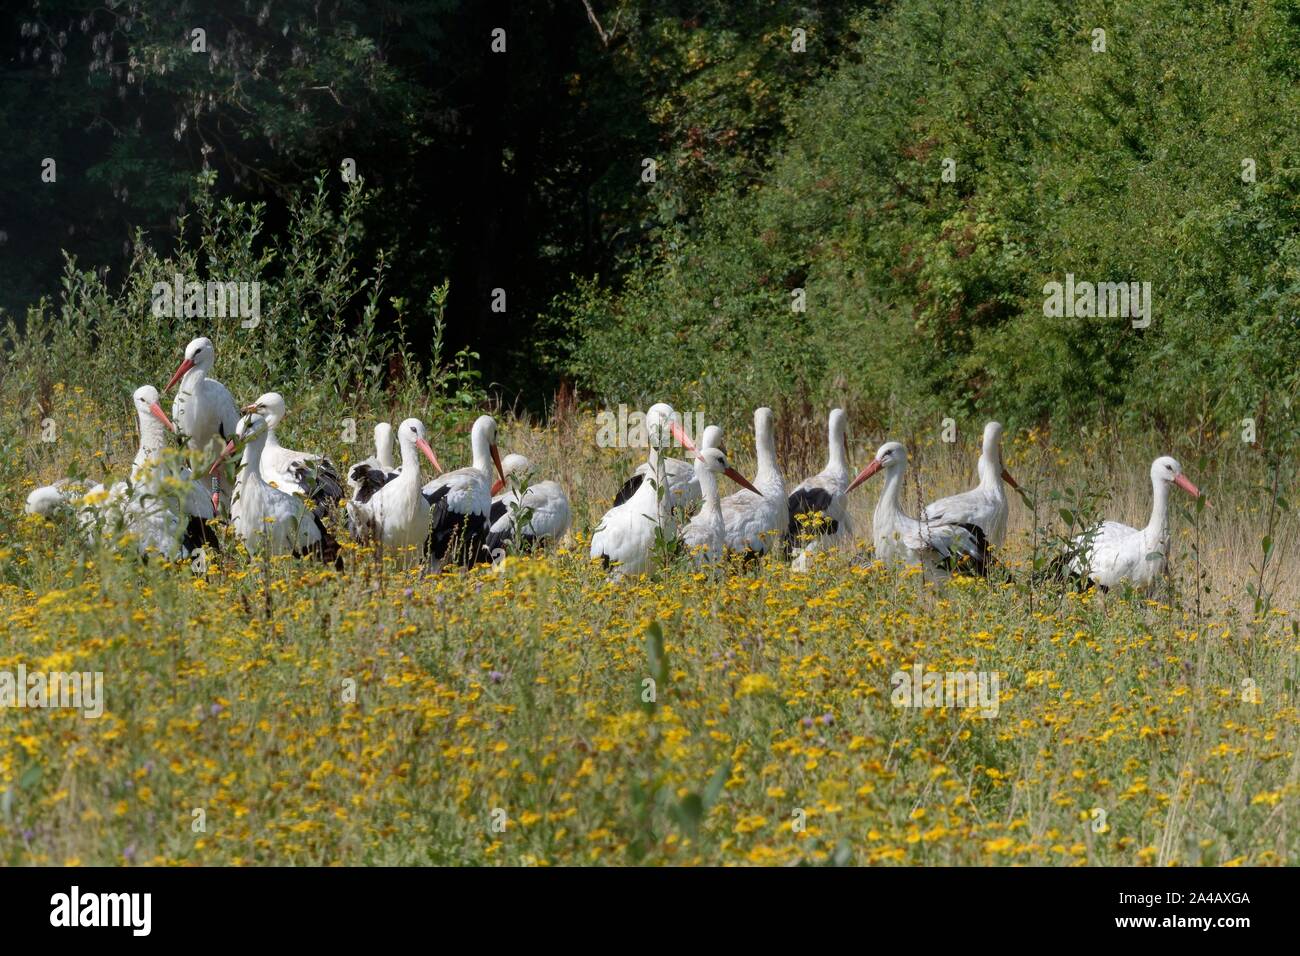 White stork (Ciconia ciconia) group within a large outdoor enclosure among Common Fleabane flowers ahead of release, Knepp Castle Estate, Sussex, UK. Stock Photo